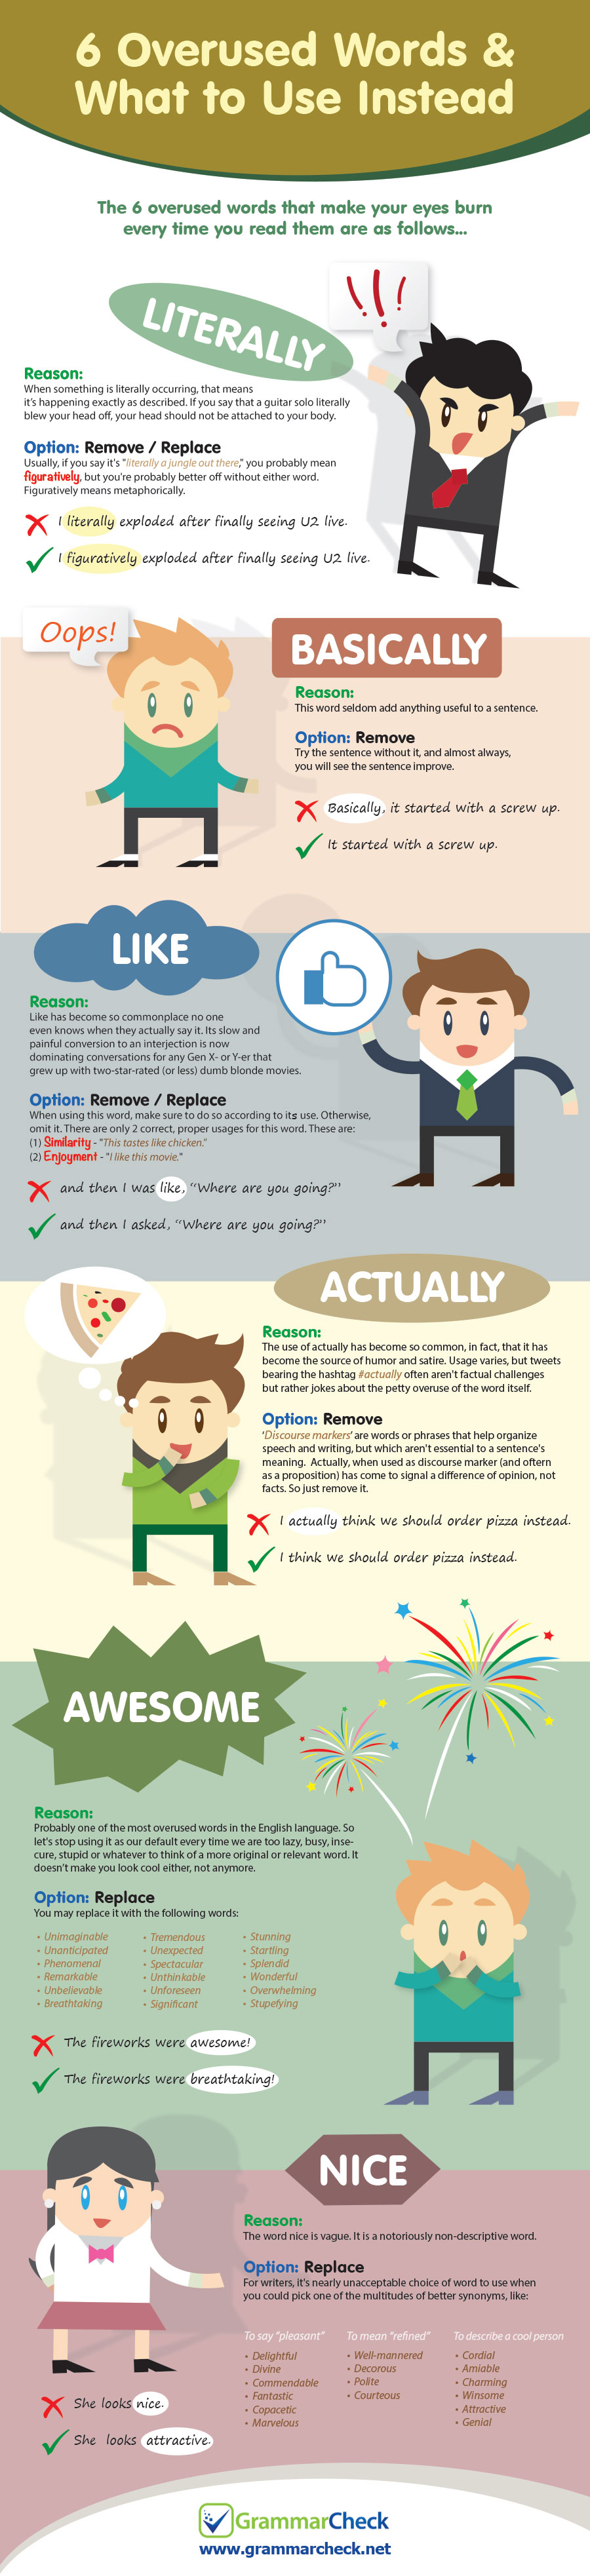 6 Overused Words & What to Use Instead (Infographic)